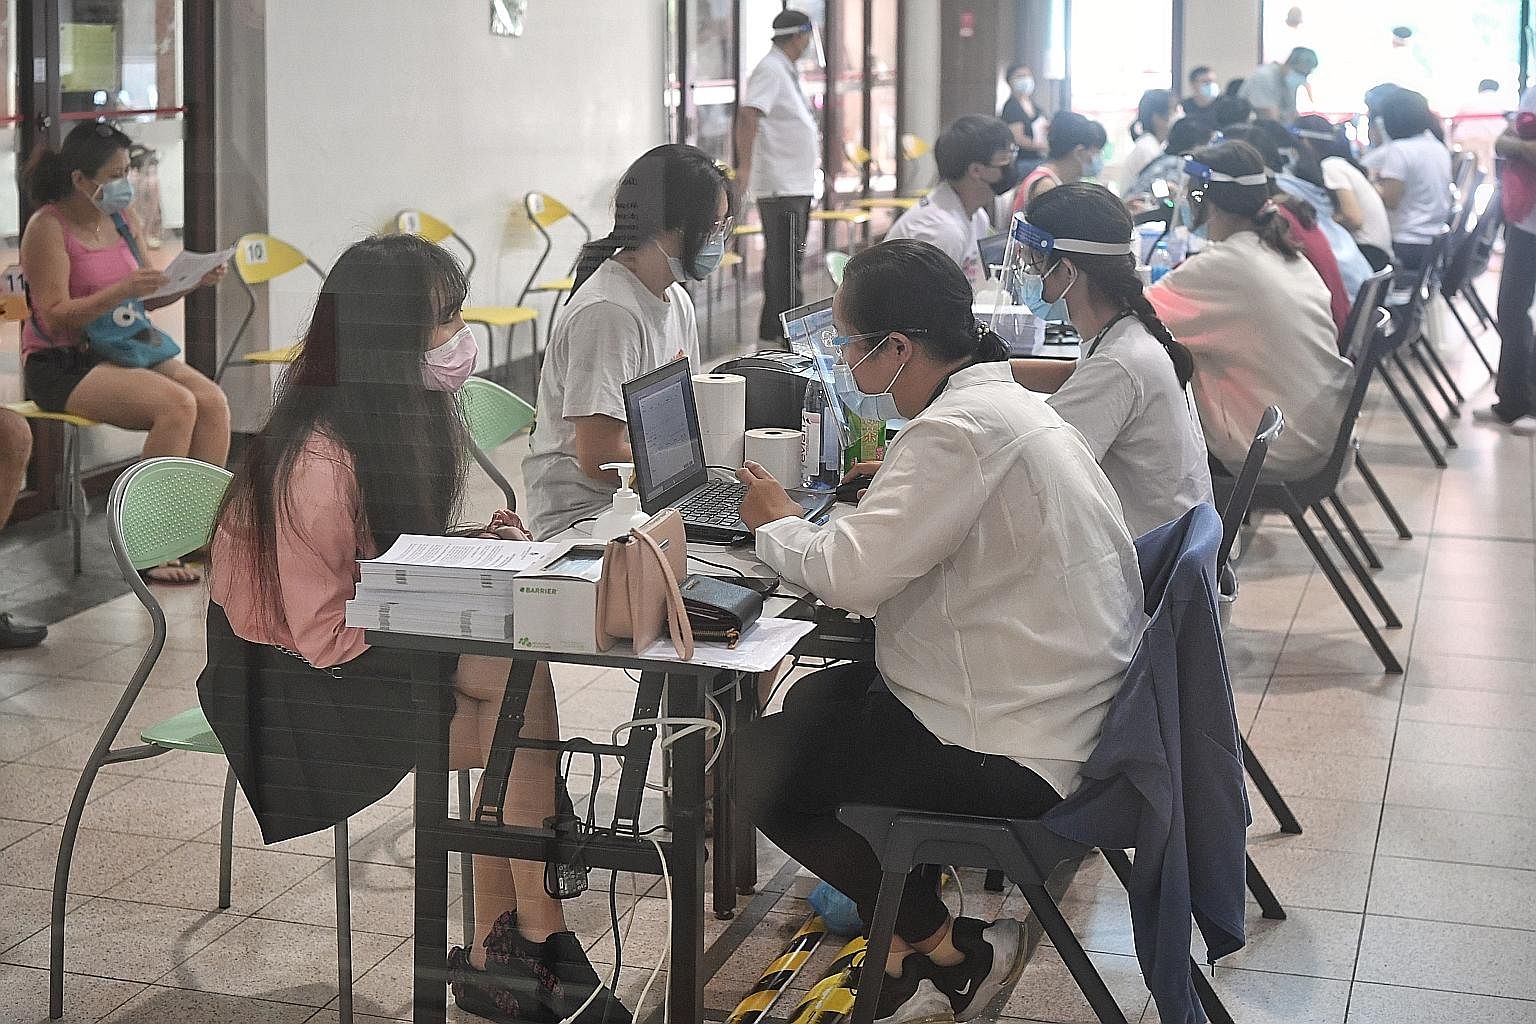 Students at Tanjong Pagar Community Club were among the first in their age group to get their Pfizer shots for Covid-19 yesterday, on the first day of the nationwide drive to vaccinate more than 400,000 schoolchildren aged 12 and above. Priority is b